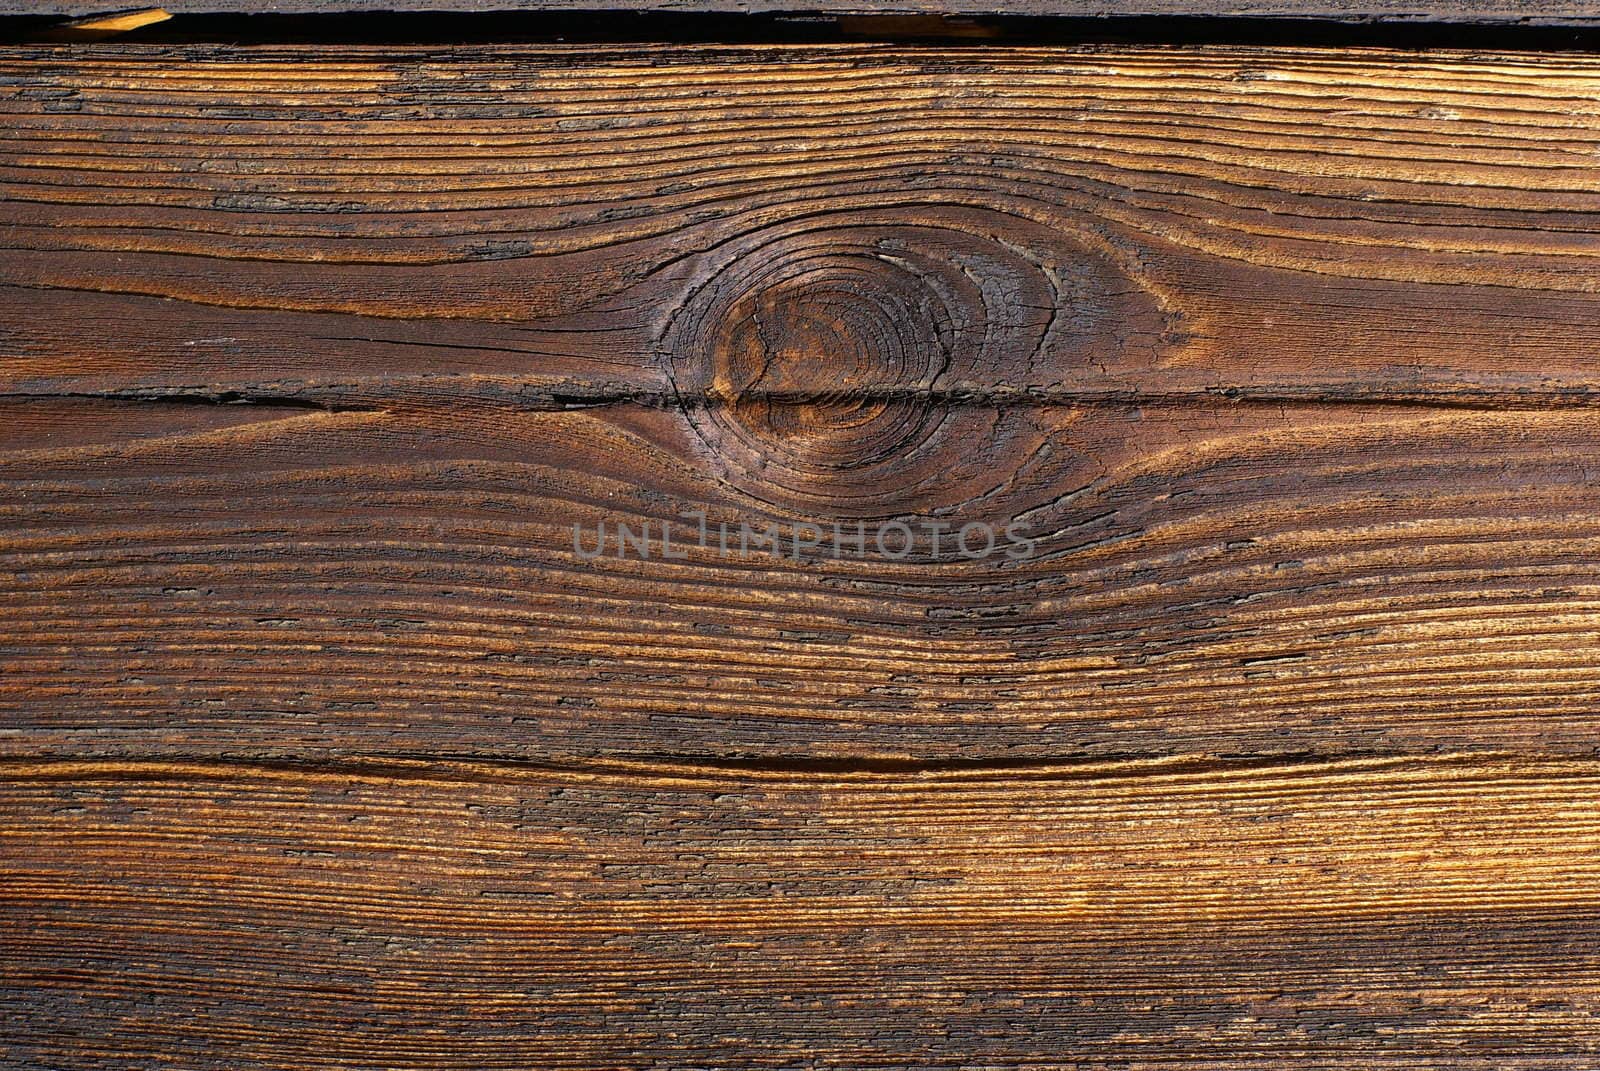 Old, rough board background with knot and clear tree grain